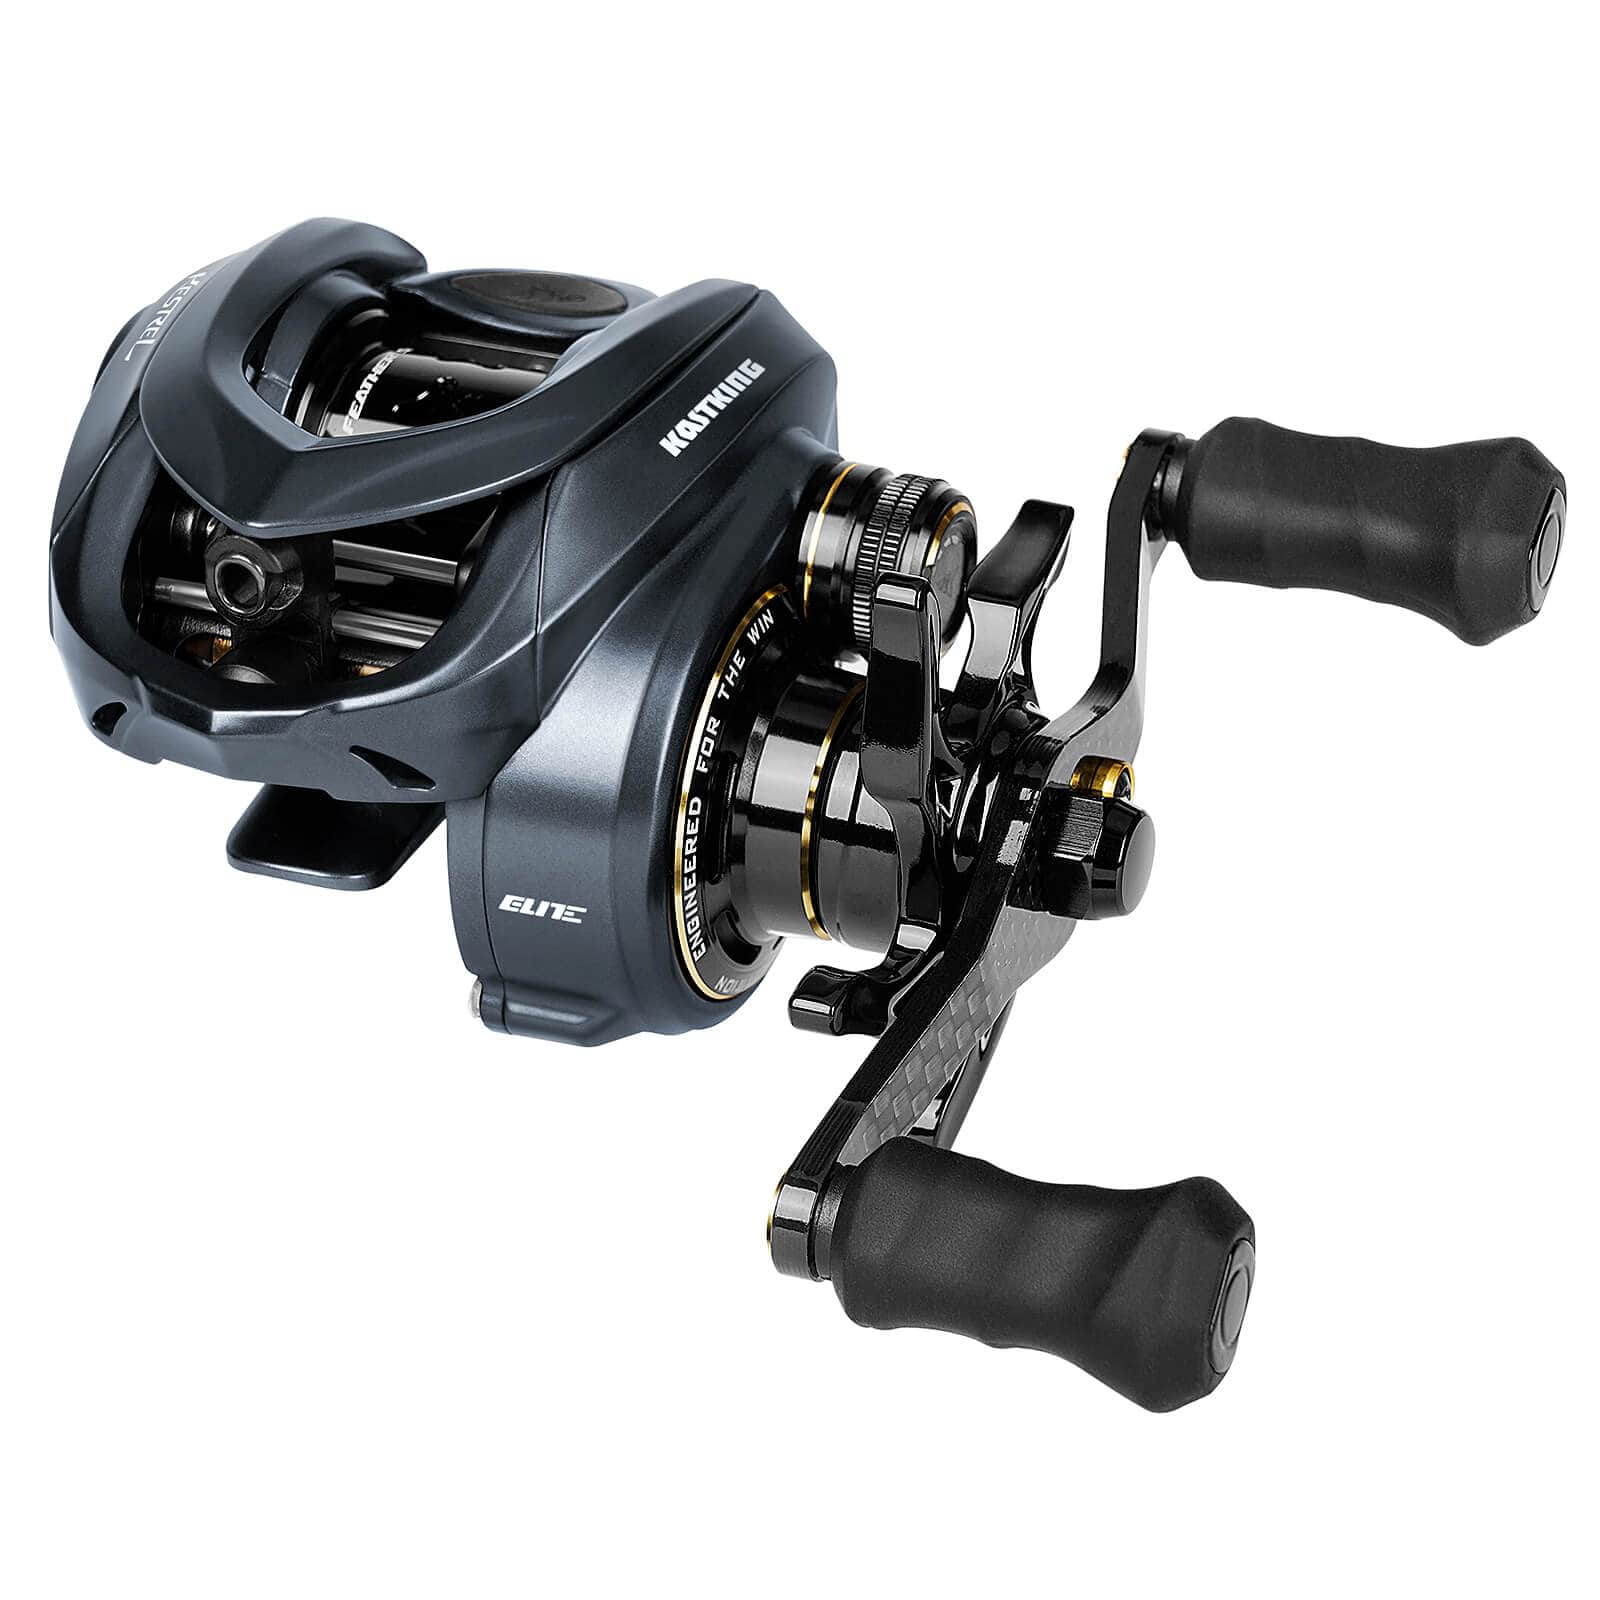 Learning How to Use the KastKing Speed Demon Baitcast Fishing Reel